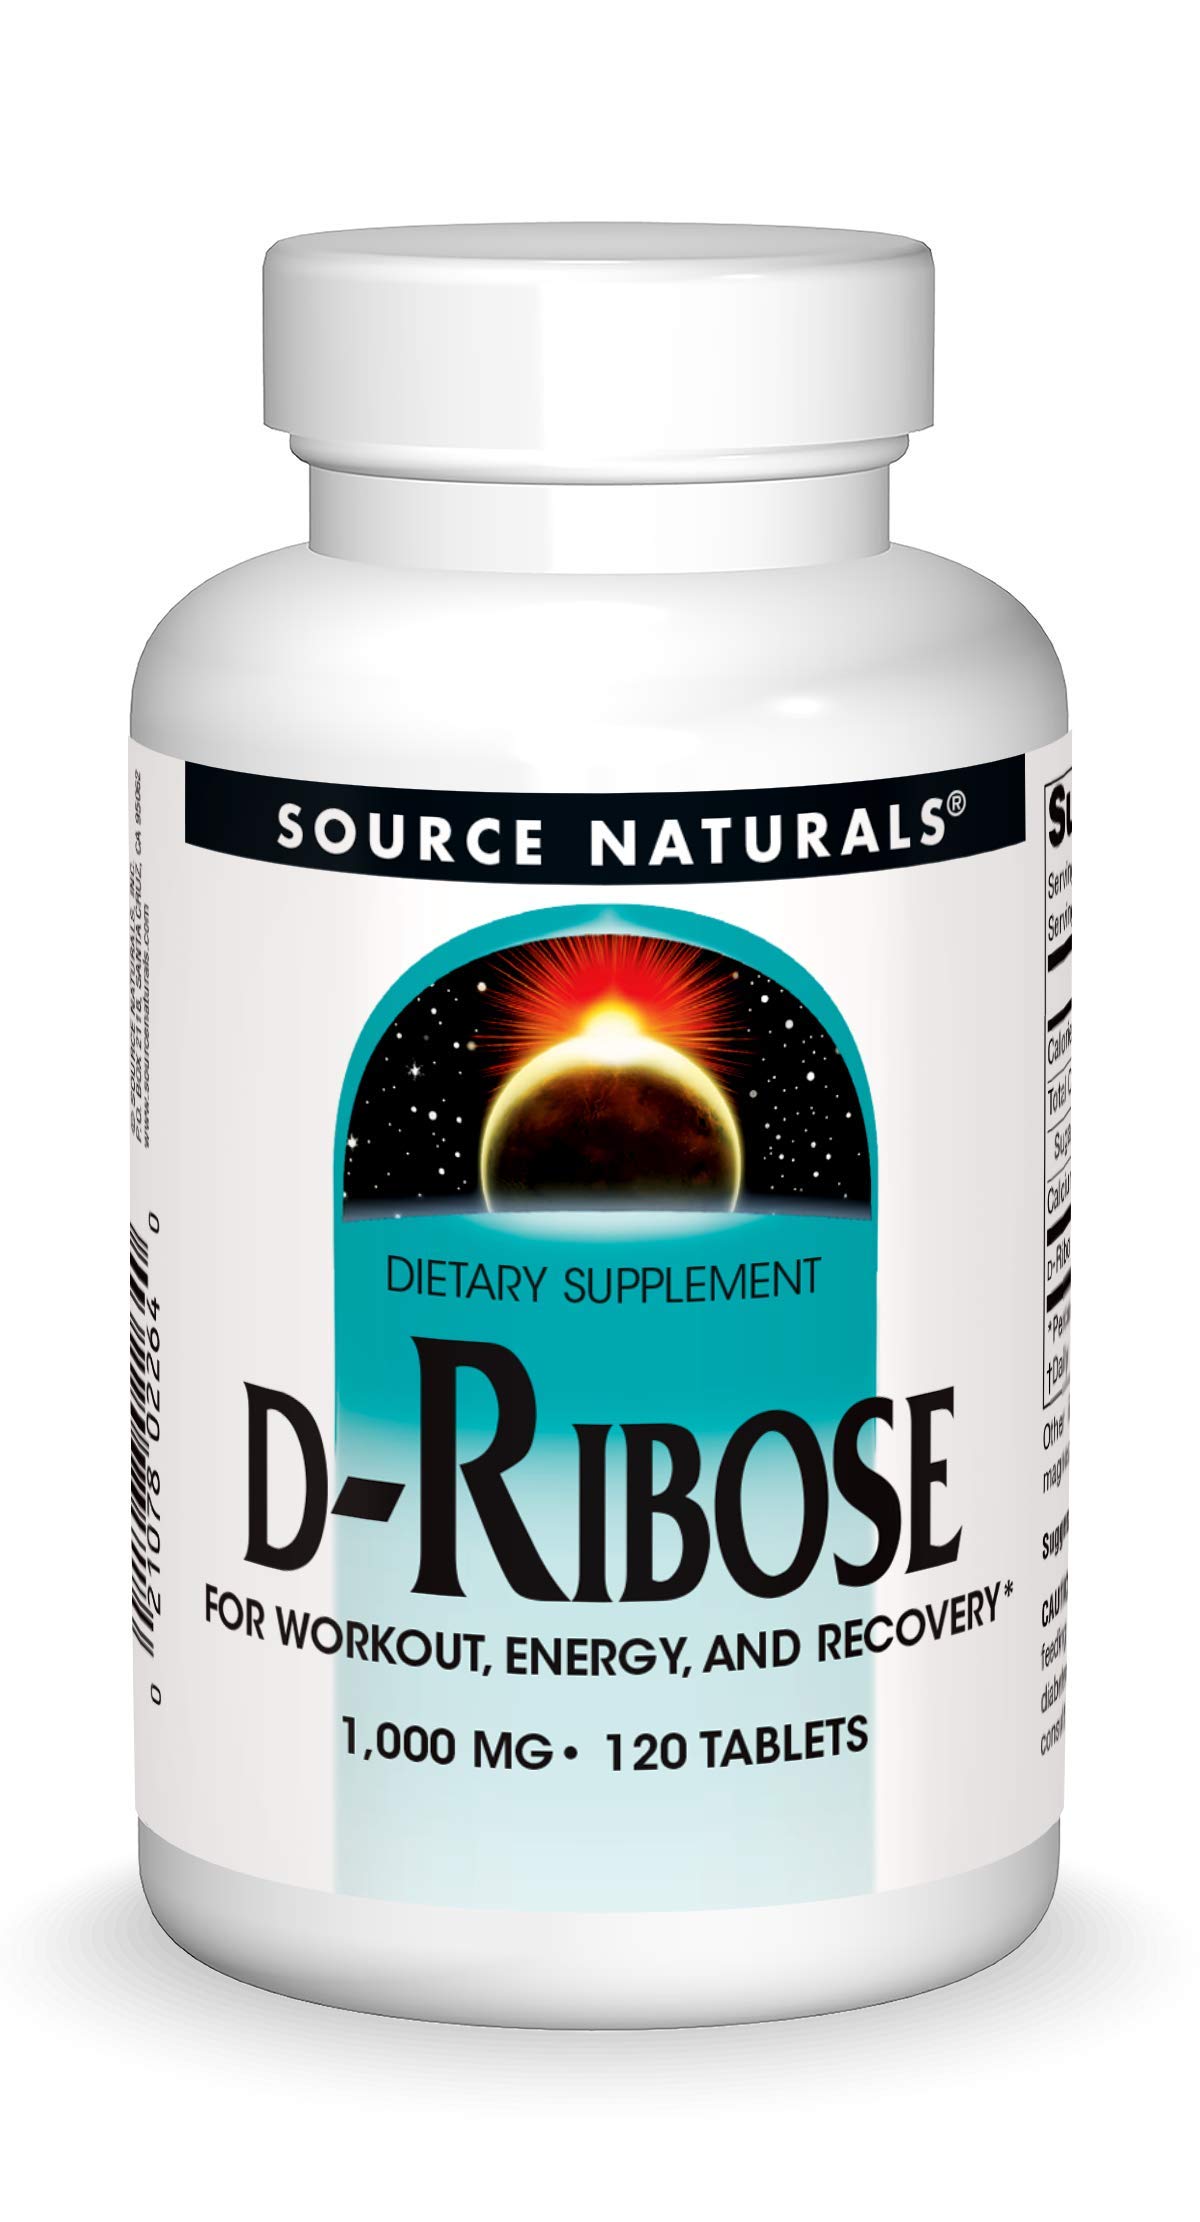 Source Naturals D-Ribose, for Workout, Energy, and Recovery, 120 Tablets